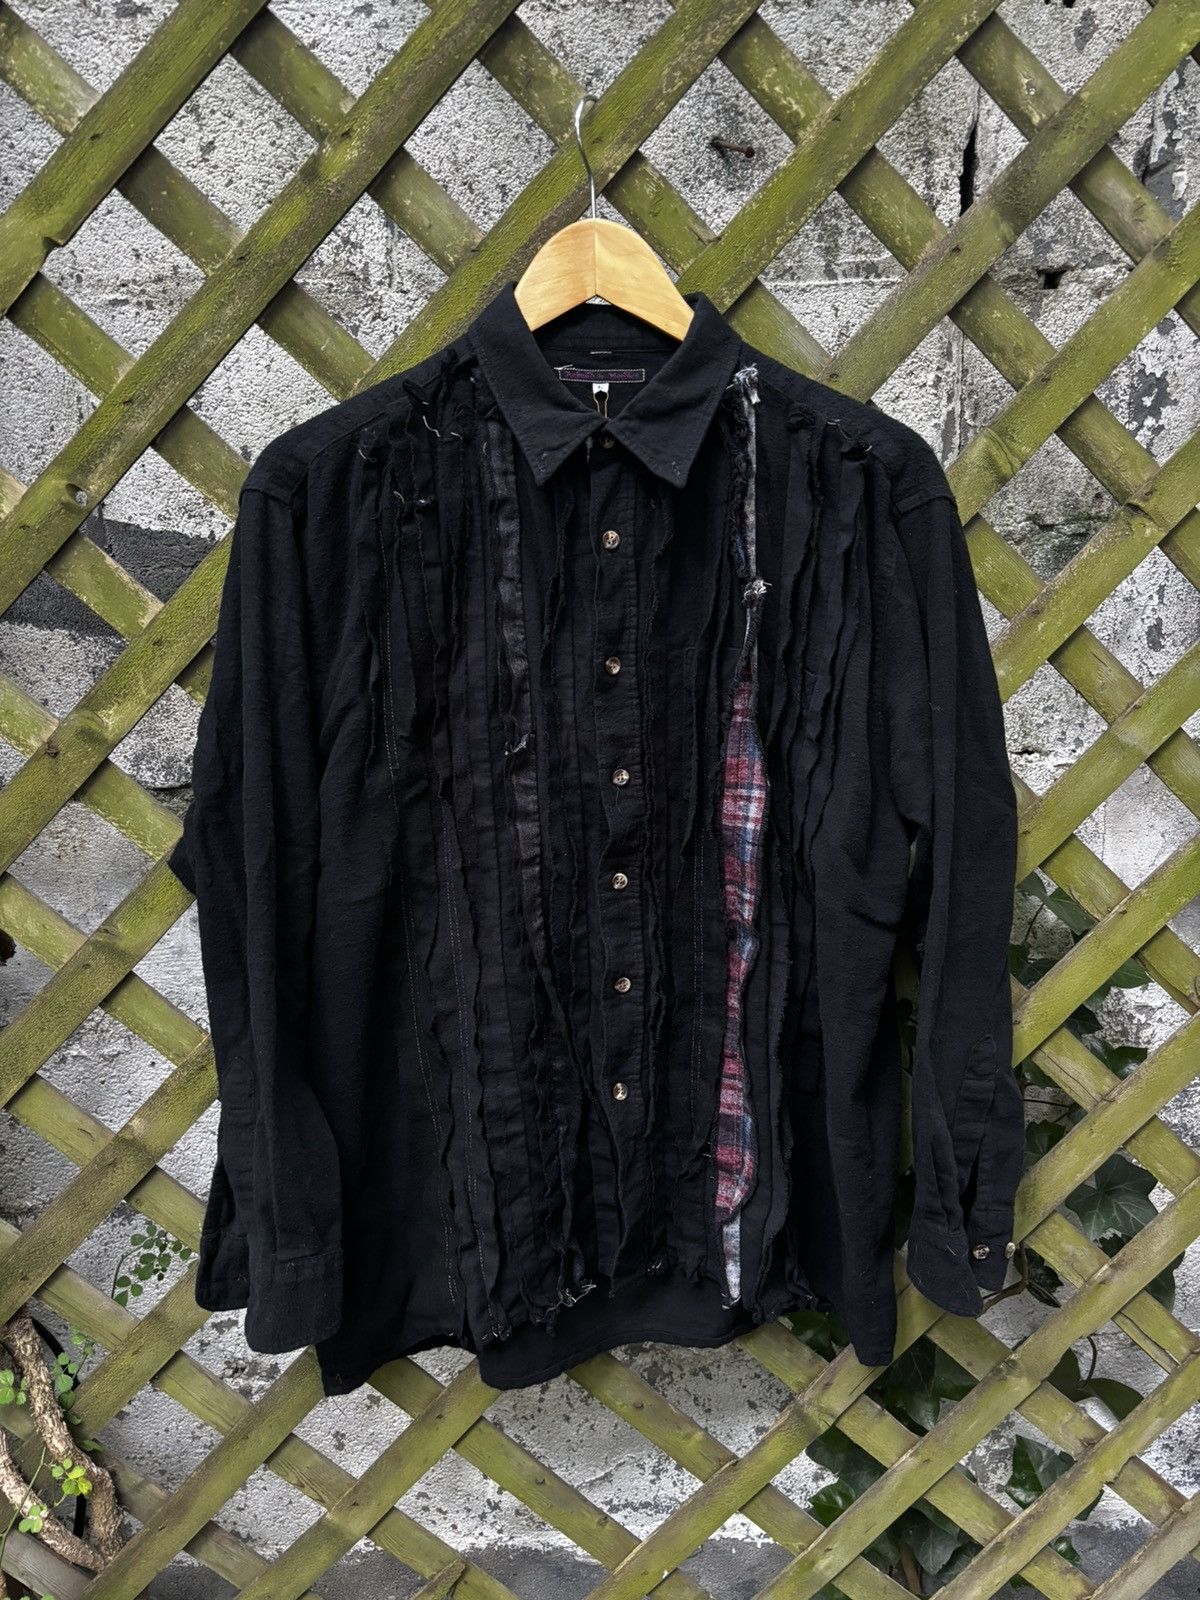 Needles Brand New! Needles Rebuild Flannel Button Up | Grailed